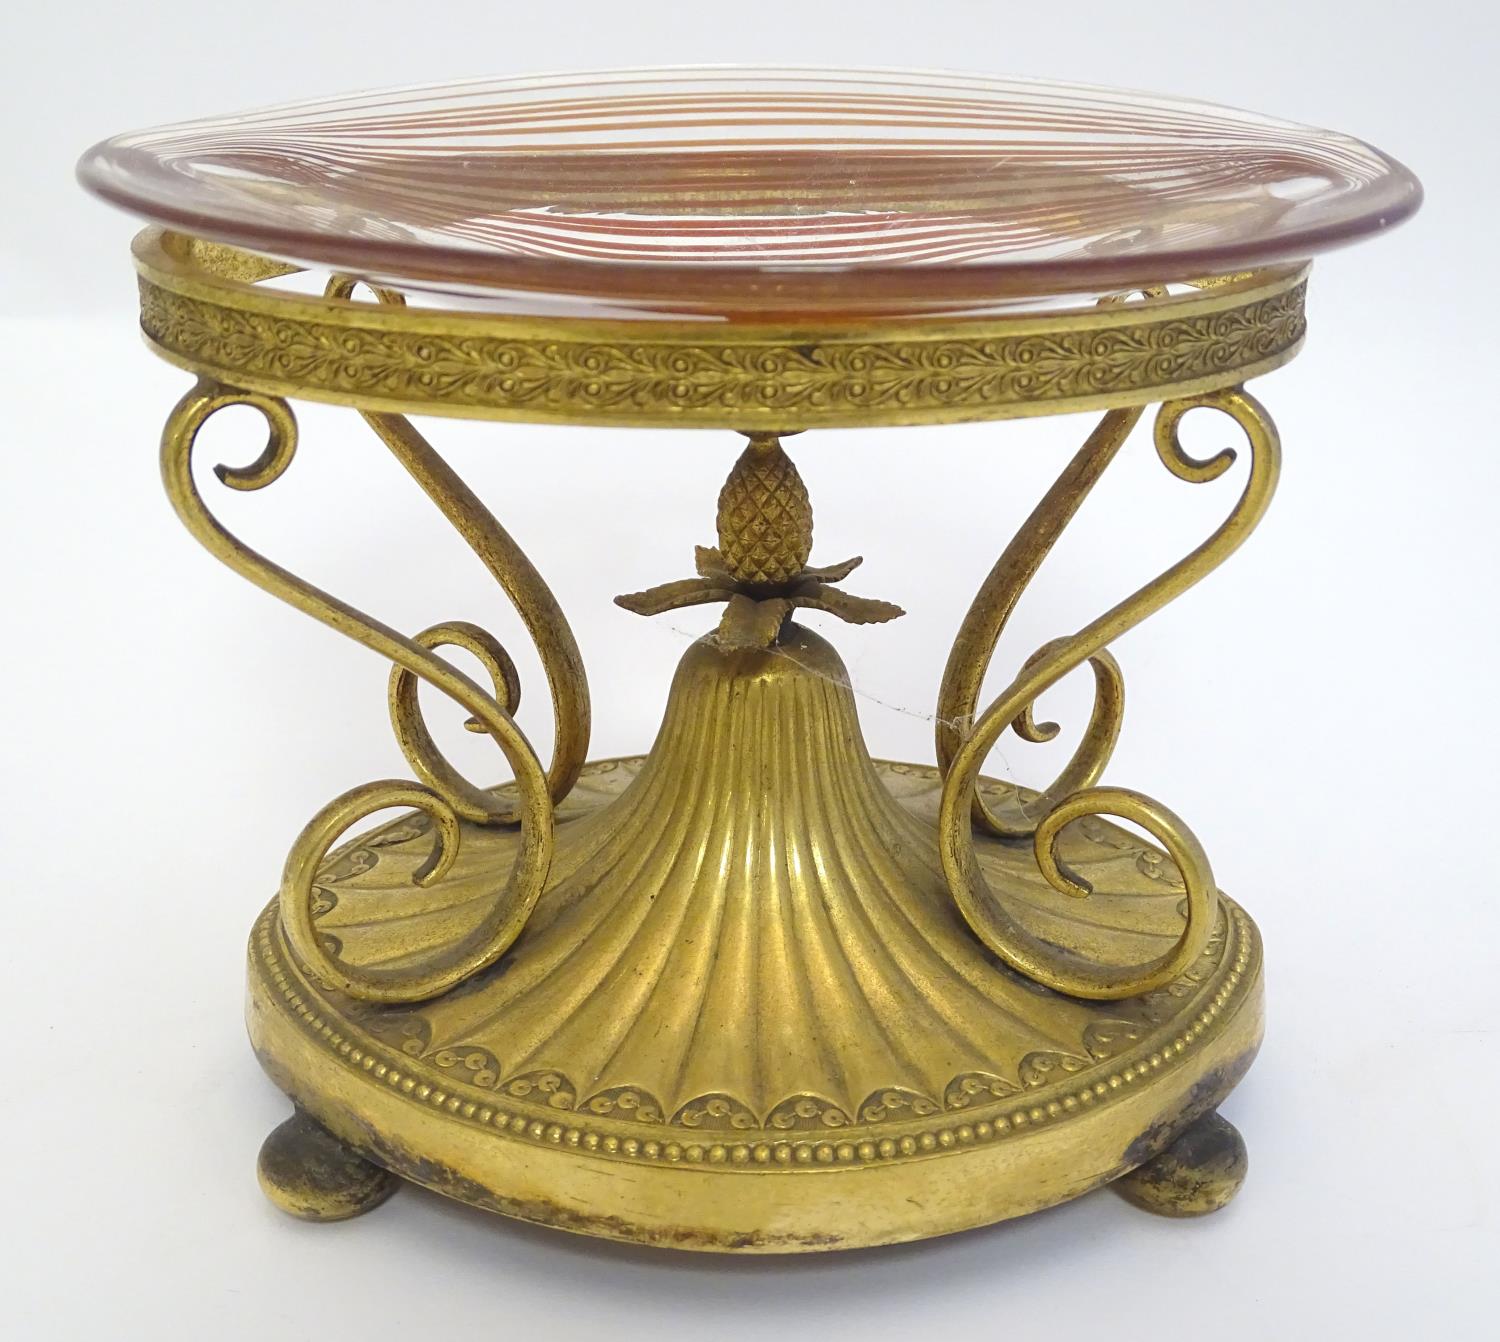 A c.1903 Elkington & Co. gilt metal oval centrepiece stand with scrolling decoration and central